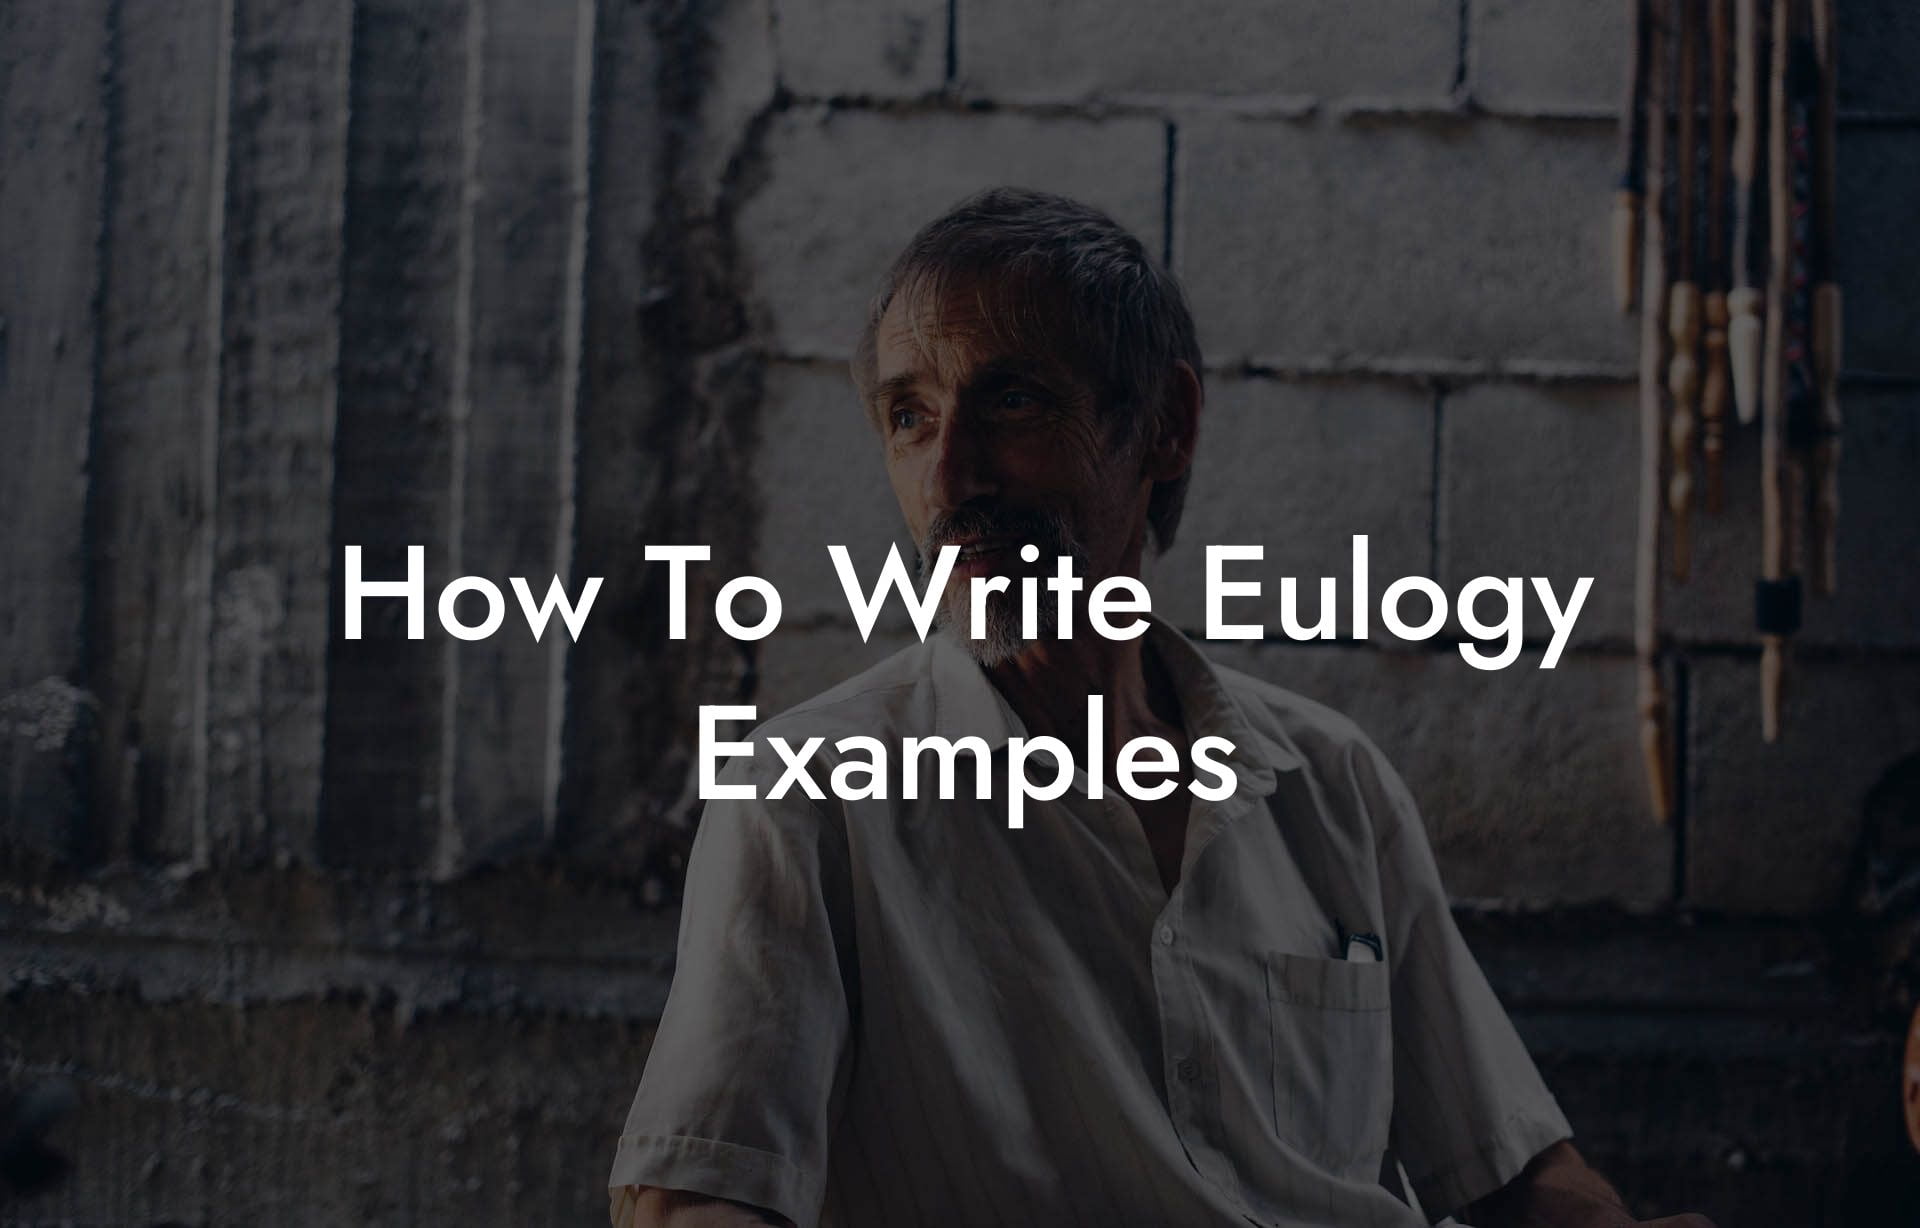 How To Write Eulogy Examples